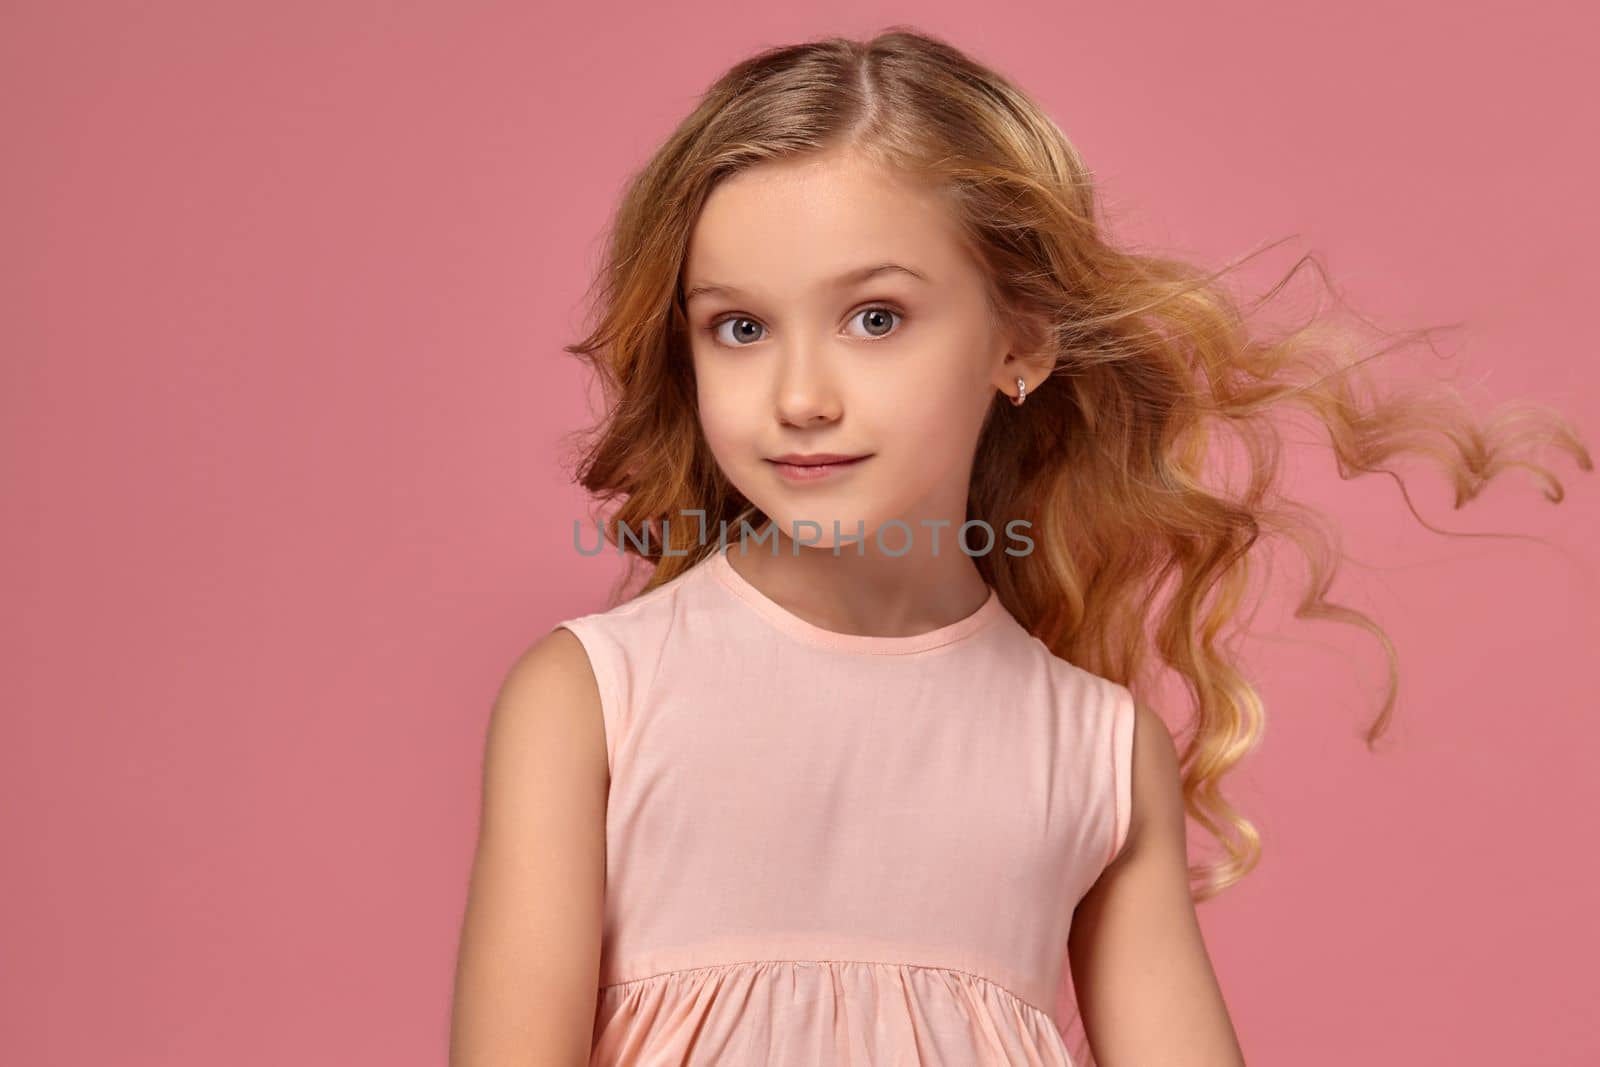 Beautiful little girl with a blond curly hair, in a pink dress is posing for the camera and her hair is fluttering, on a pink background